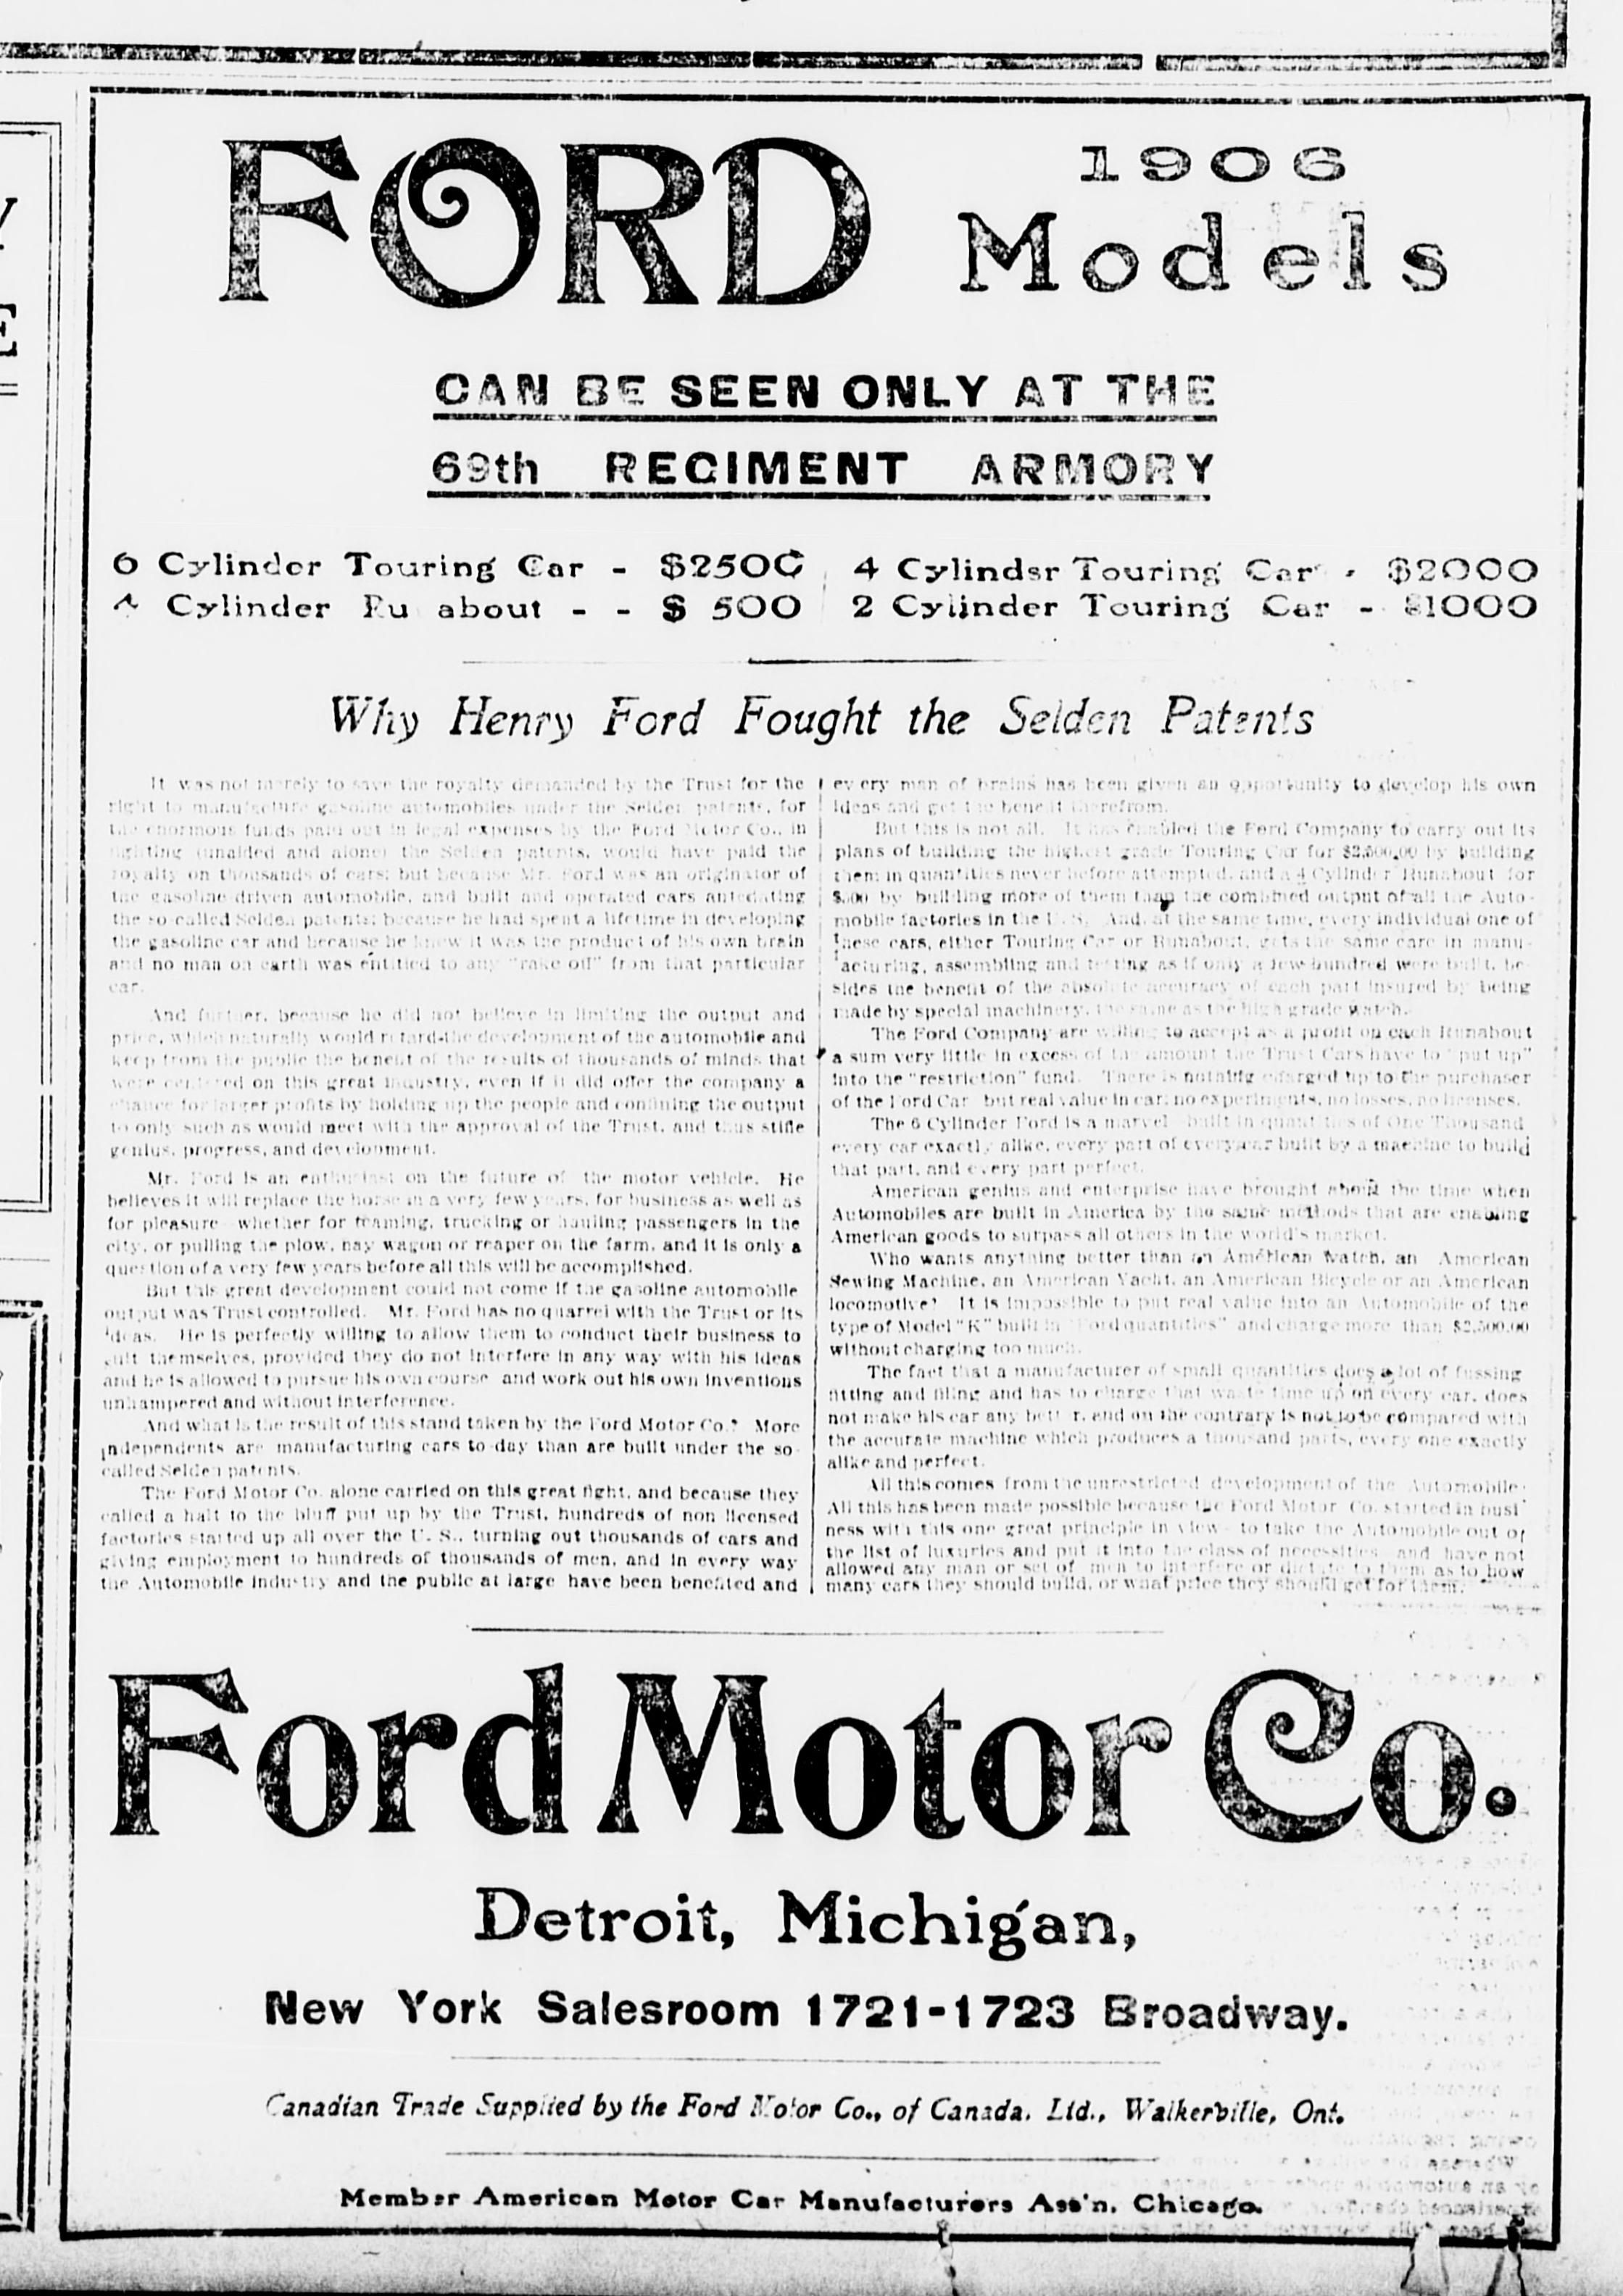 How many patents does ford motor company have #8